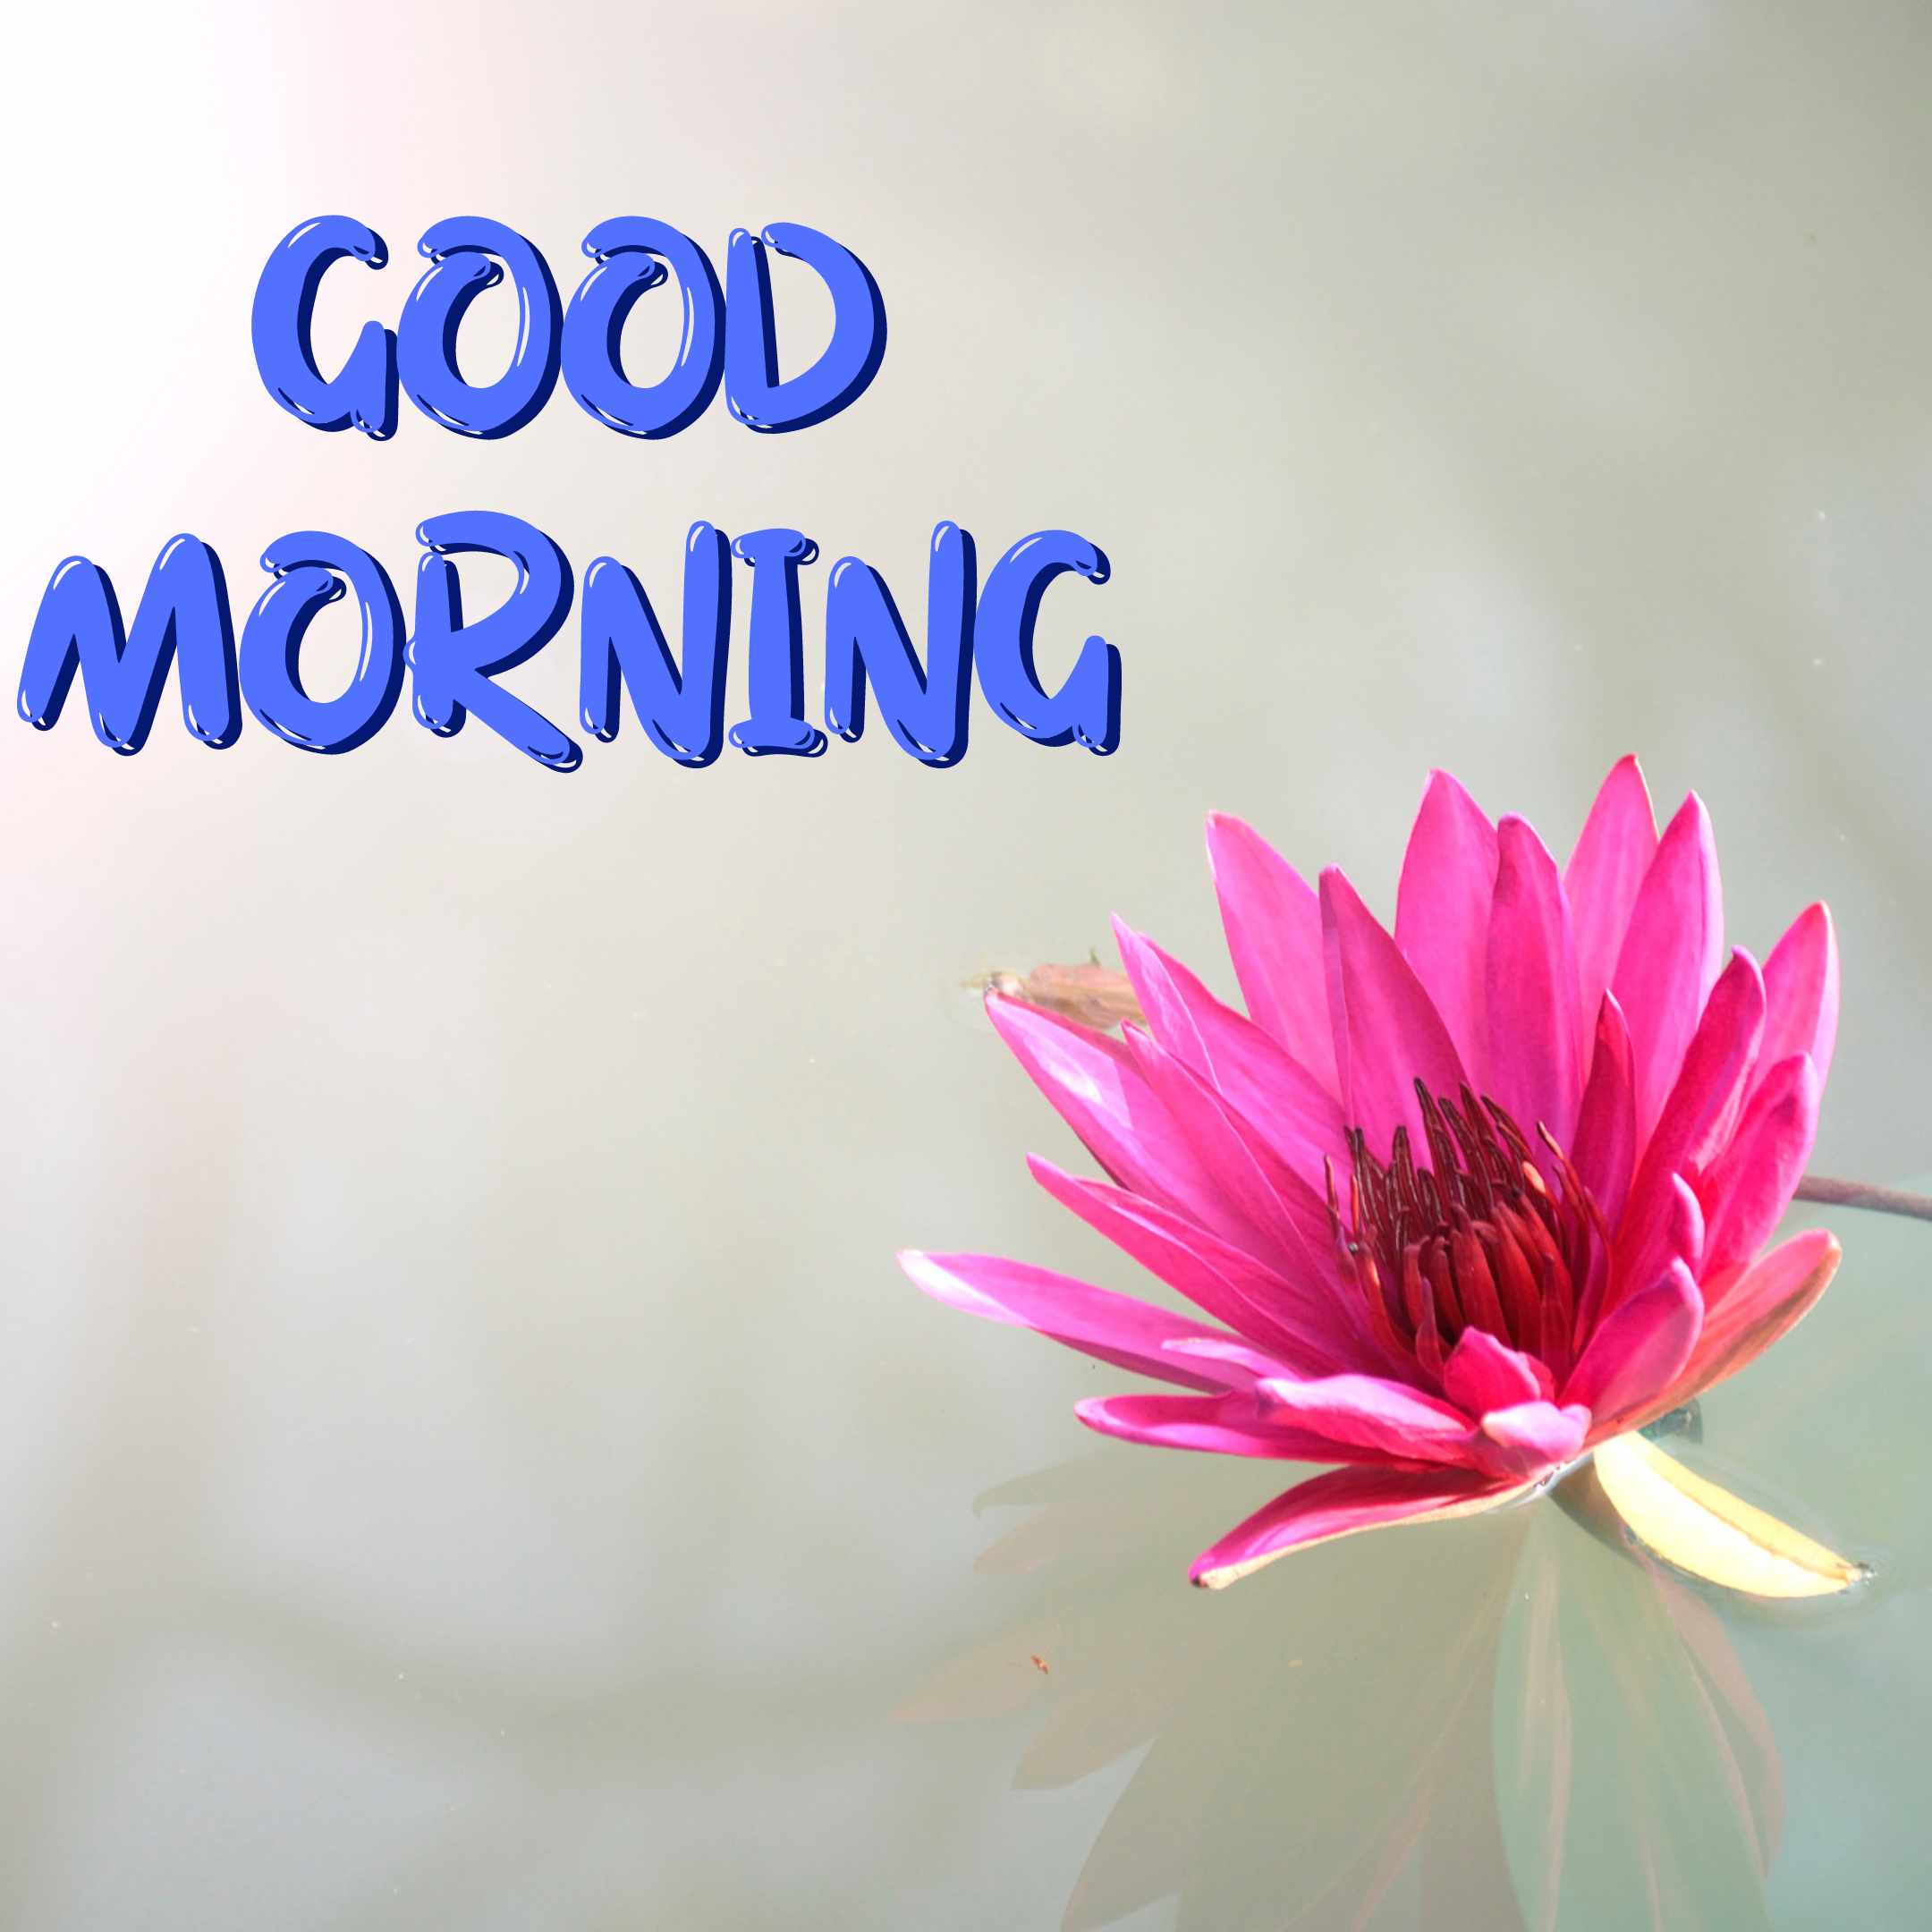 good morning flower images free download hd